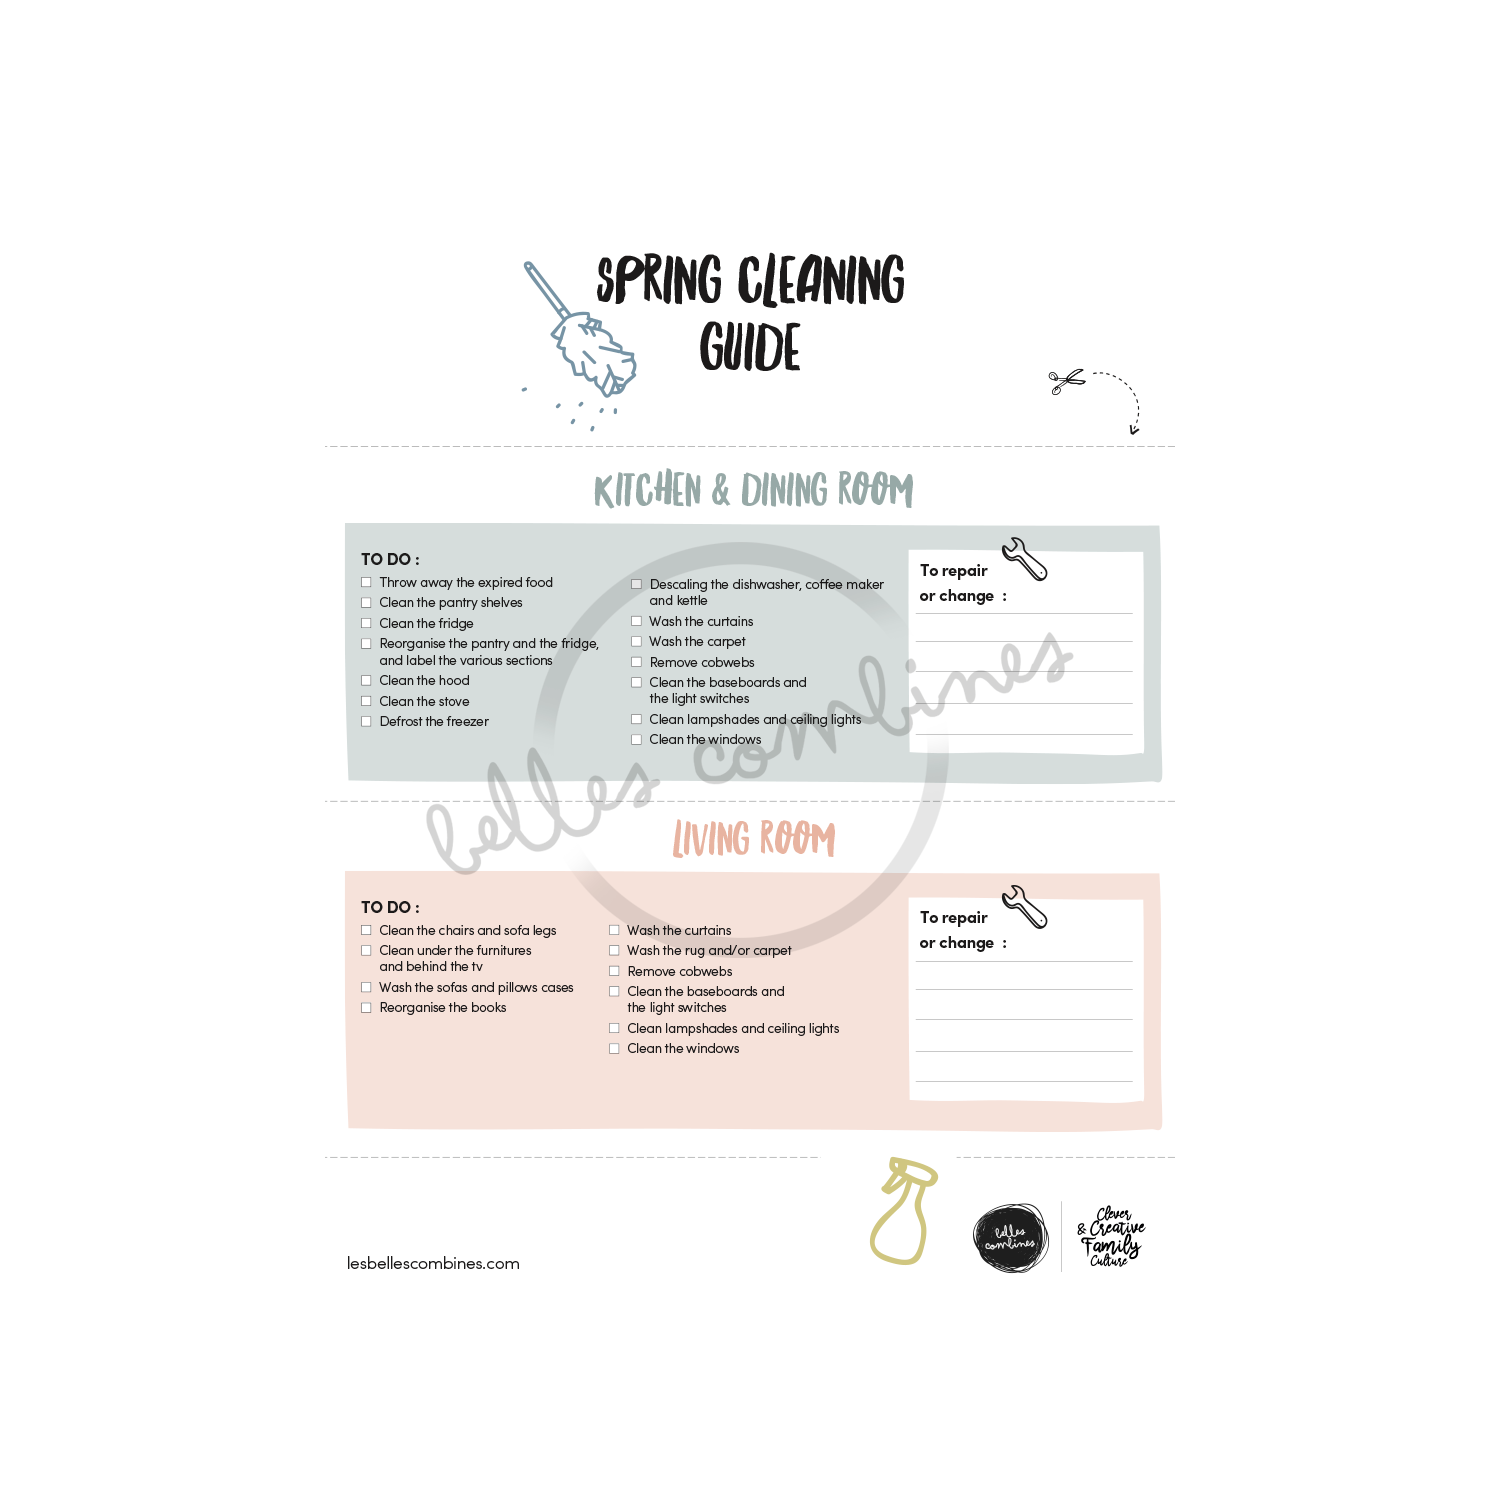 English version of the spring cleaning guide to print made by Les Belles Combines